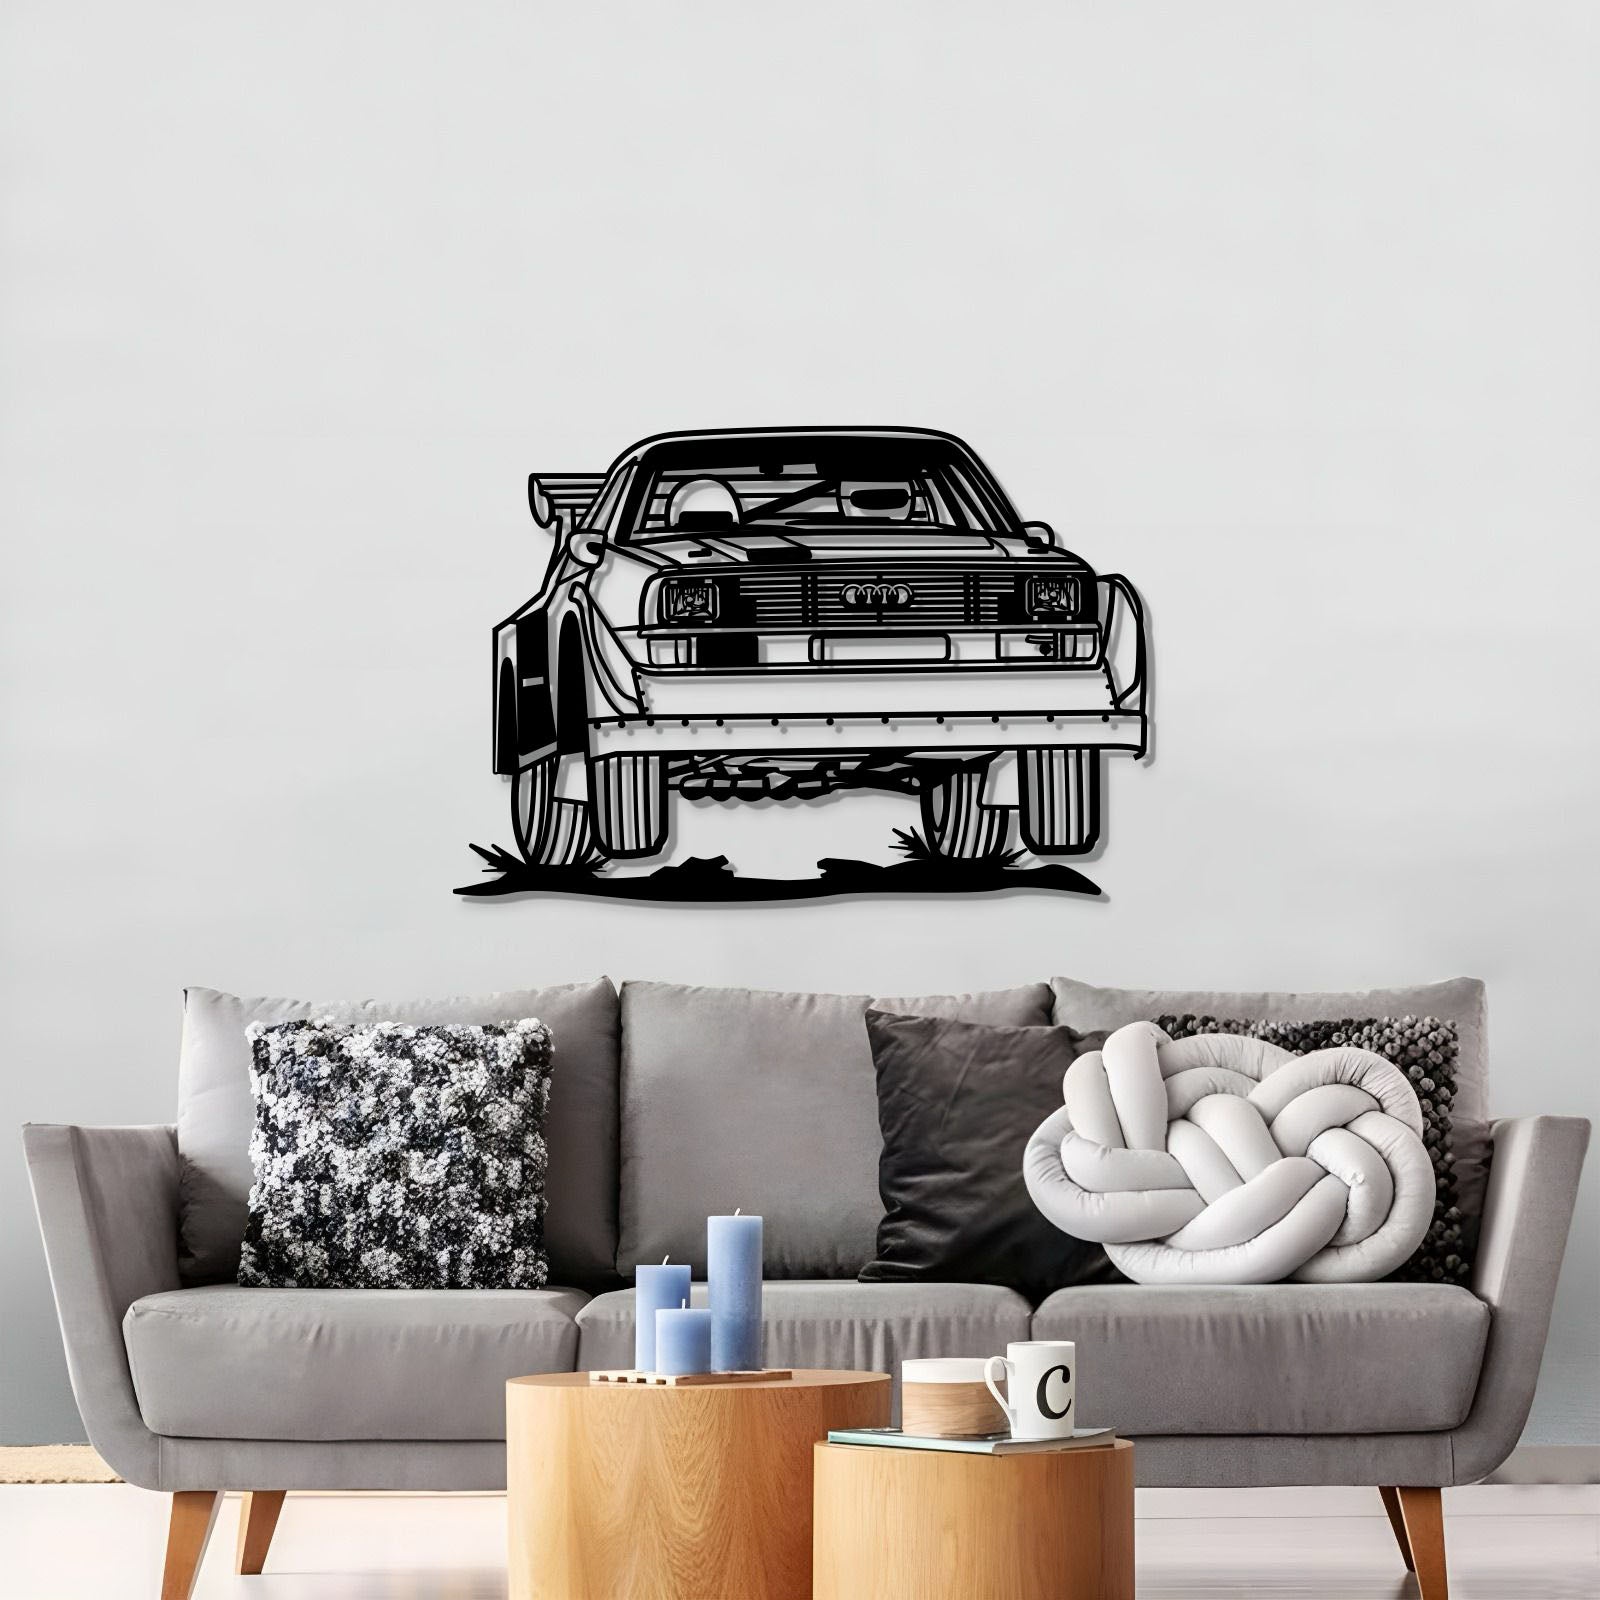 S1 Group B Perspective Metal Car Wall Art - MT1140